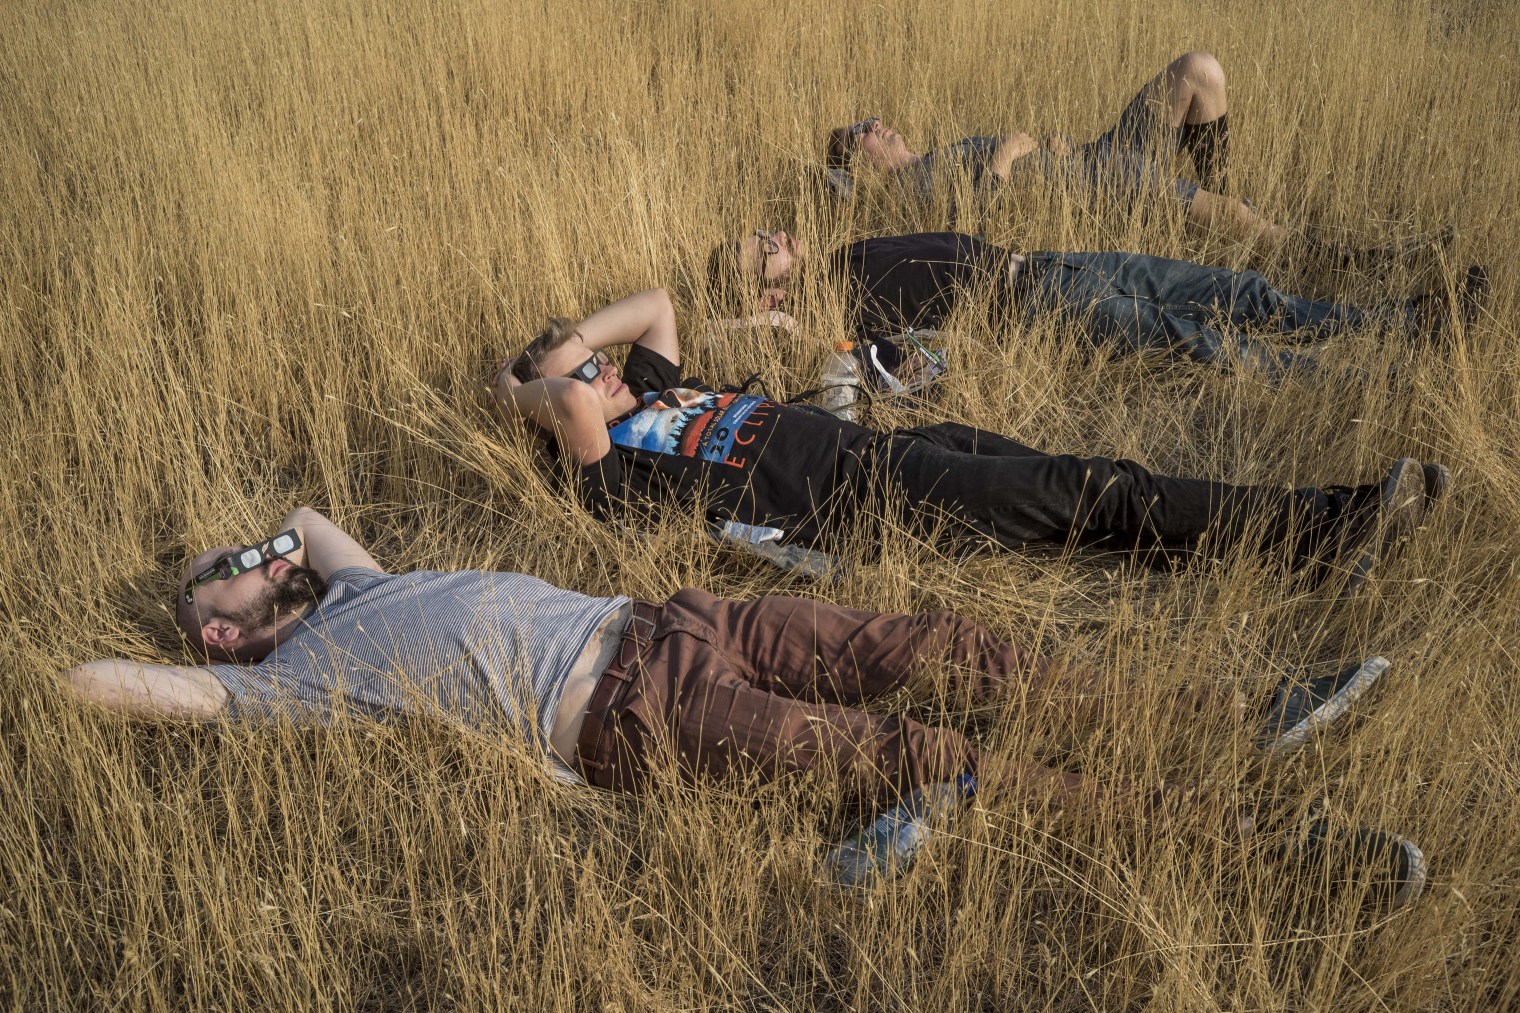 Four men relax before the time the moon will have full coverage over the sun in a field overlooking this small town which is in the path of totality in Madras, Ore., on Aug. 21, 2017.